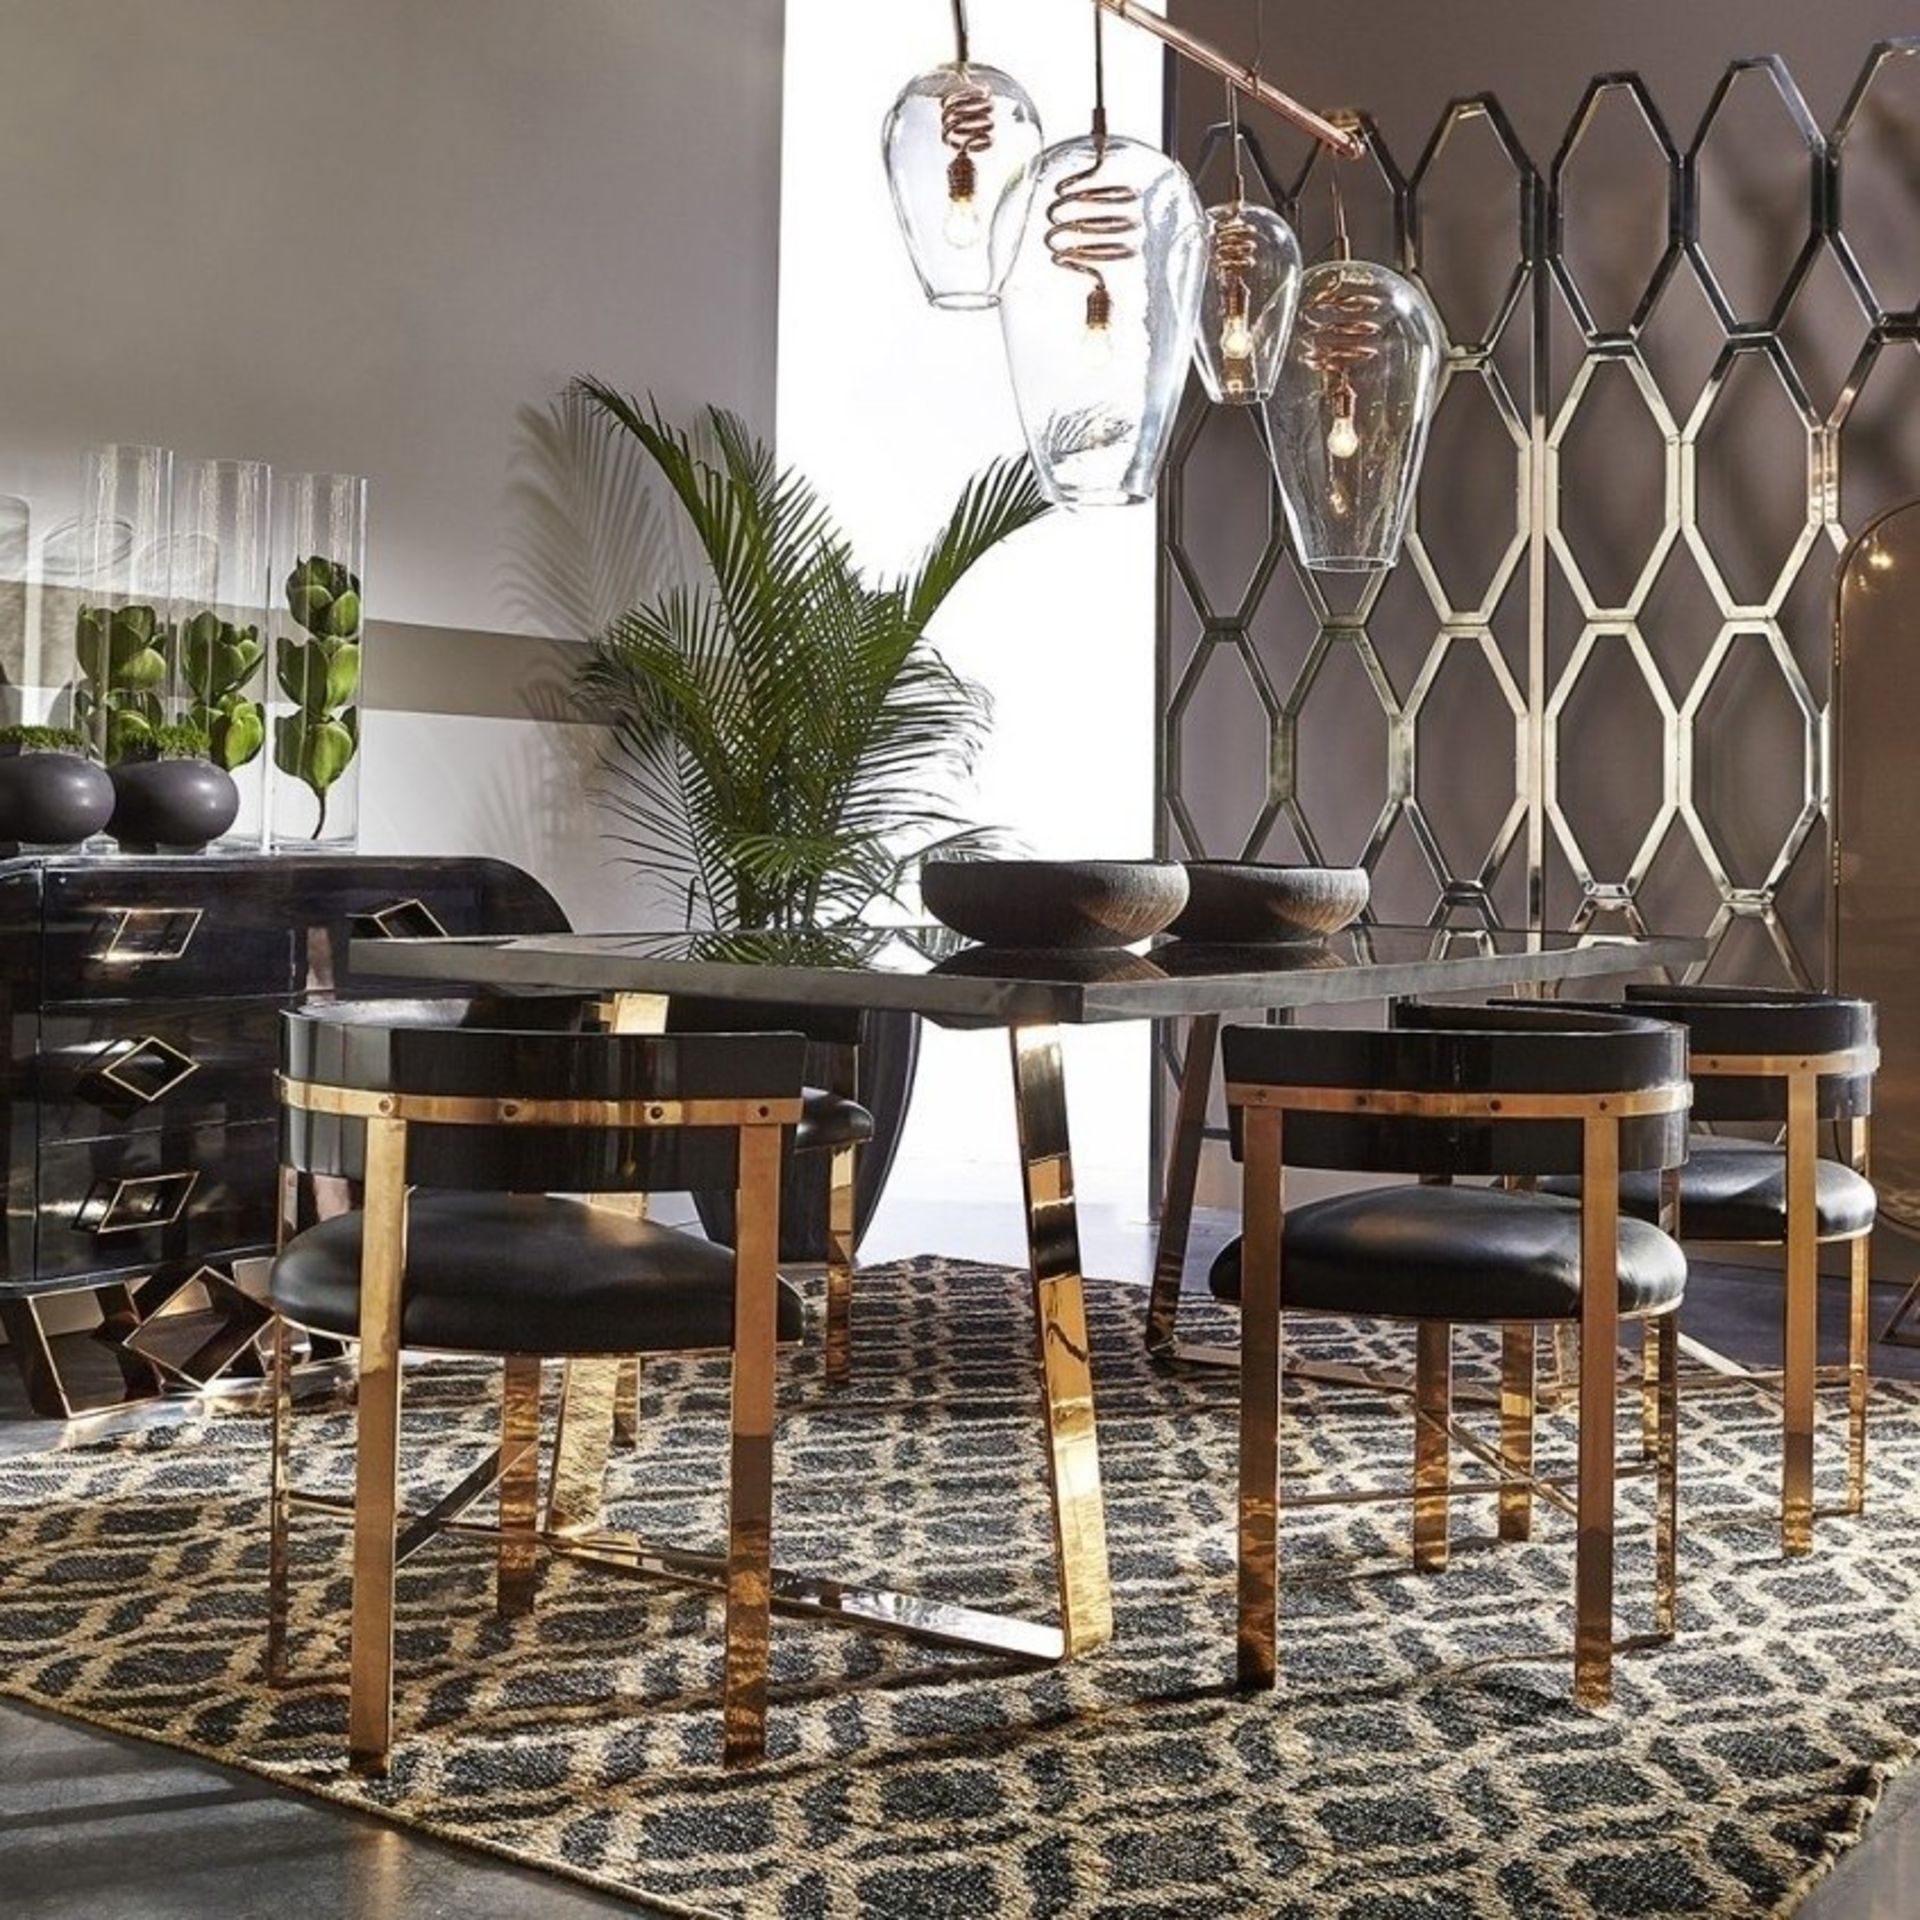 Leather Art Dining Chair - Mirrored Brass / Black Onyx Leather The Art Dining Chair Incorporates